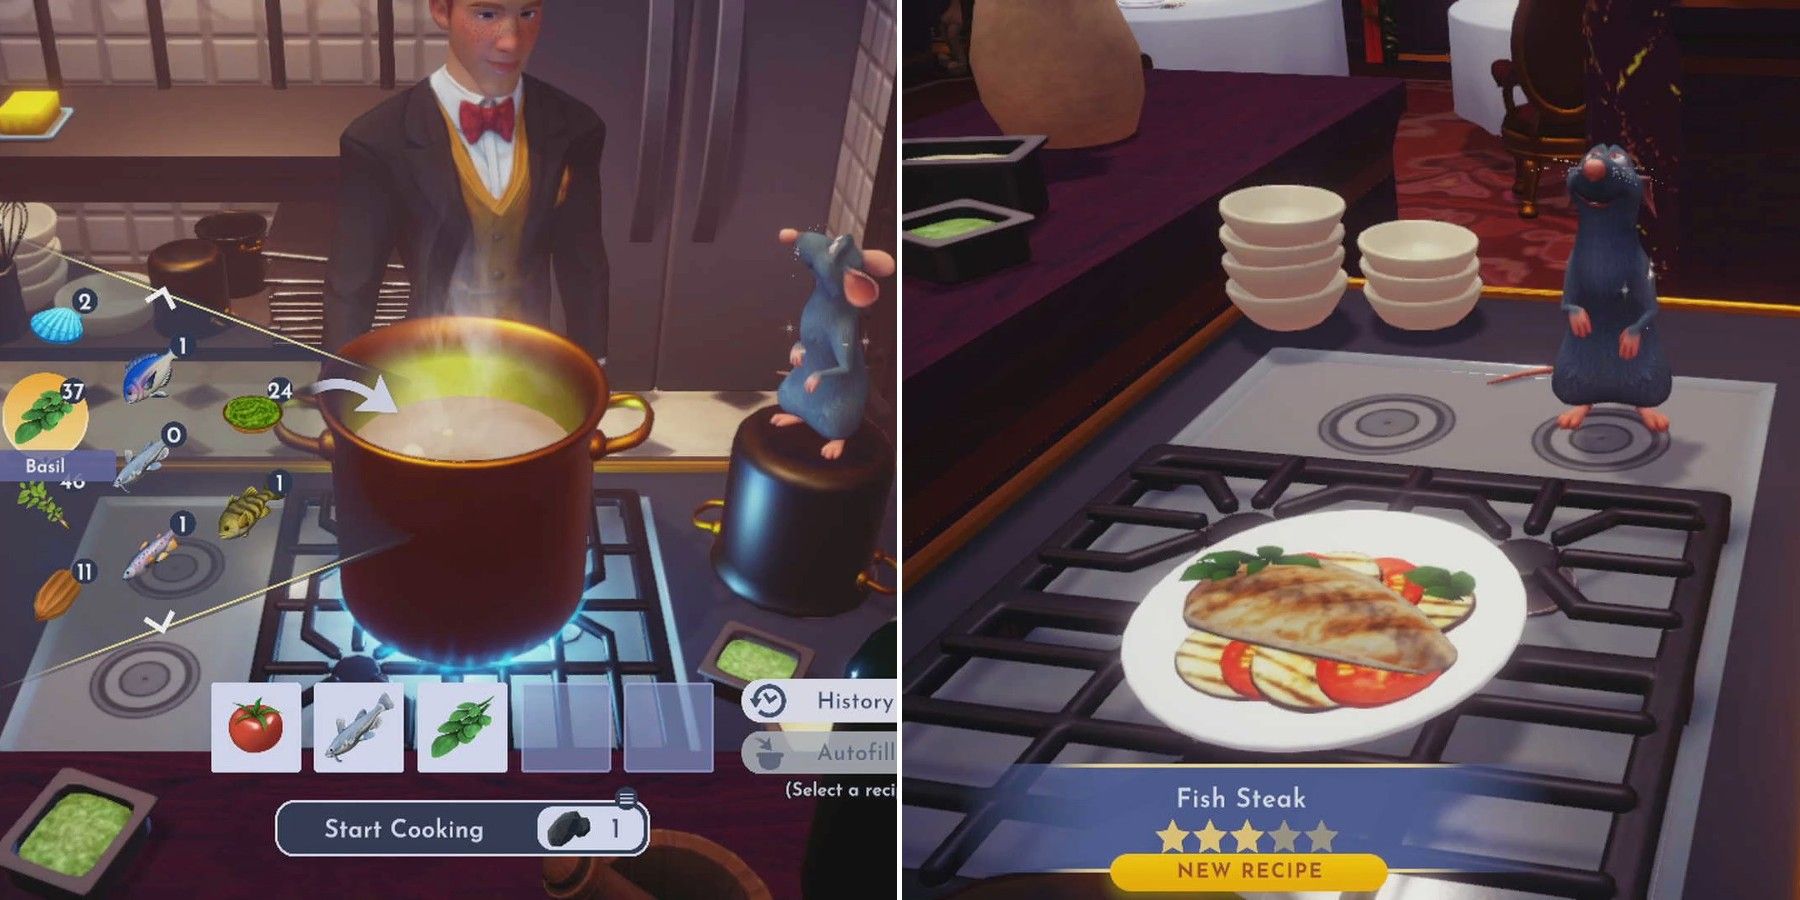 How to Cook the Perfect Fish Steak: Disney Dreamlight Valley Recipe